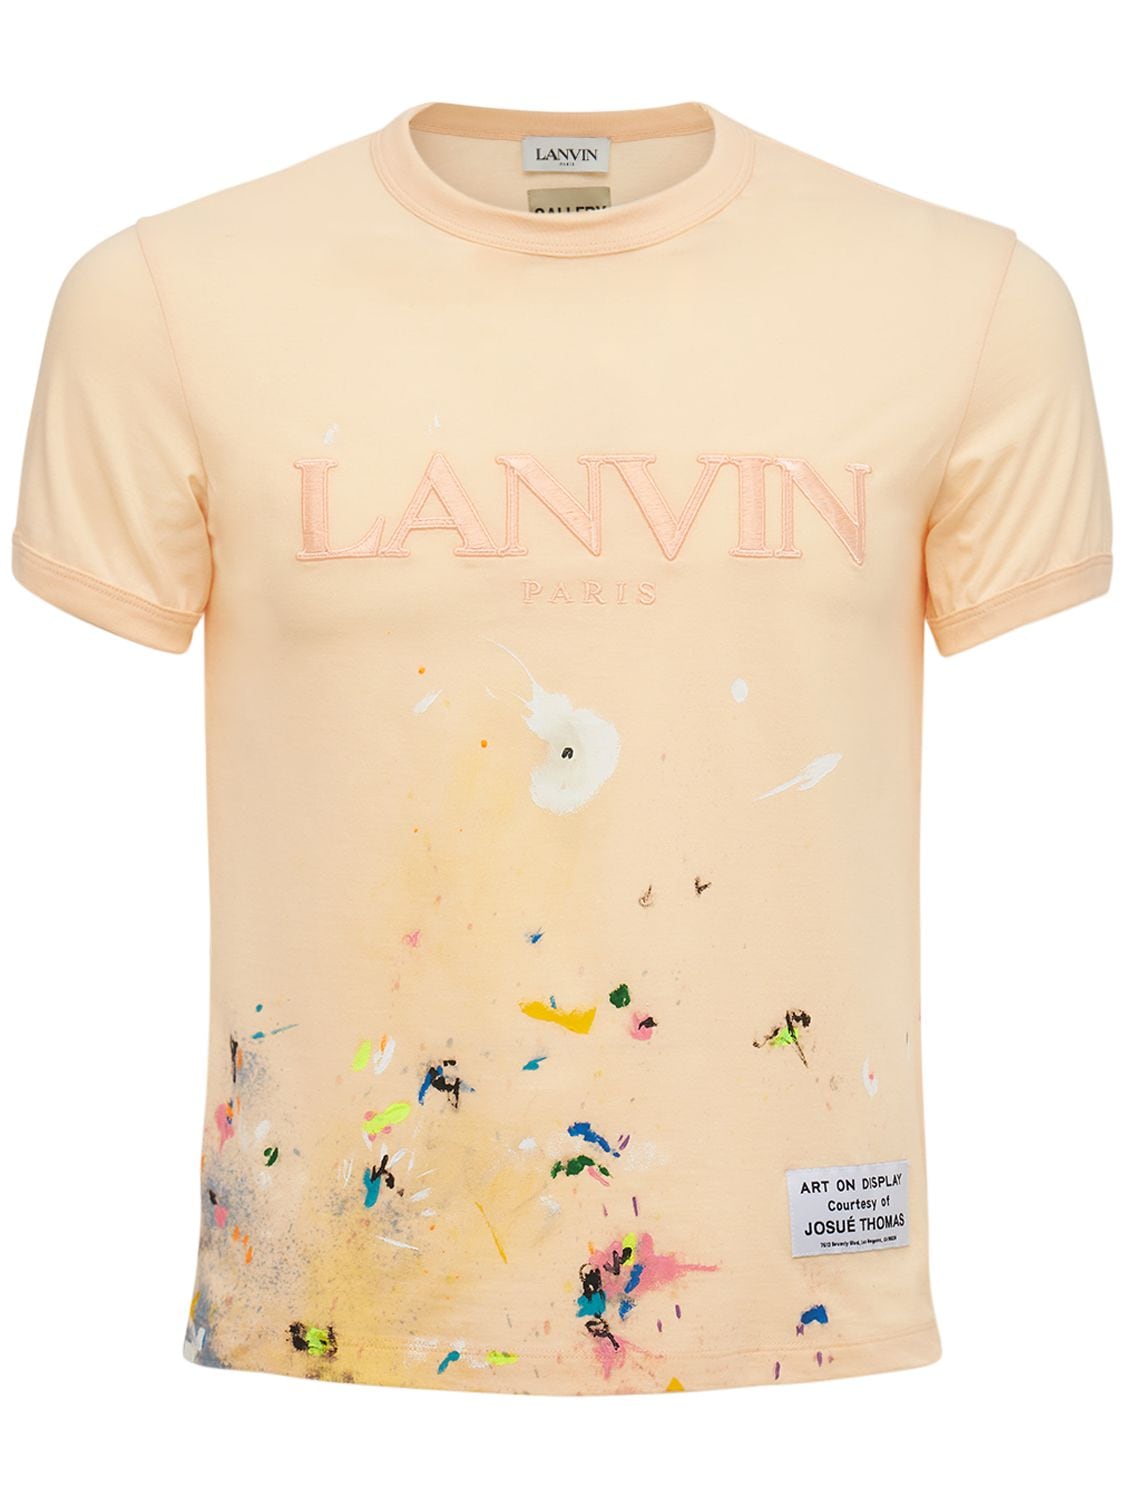 GALLERY DEPT X LANVIN Relaxed Hand Painted Washed T-shirt